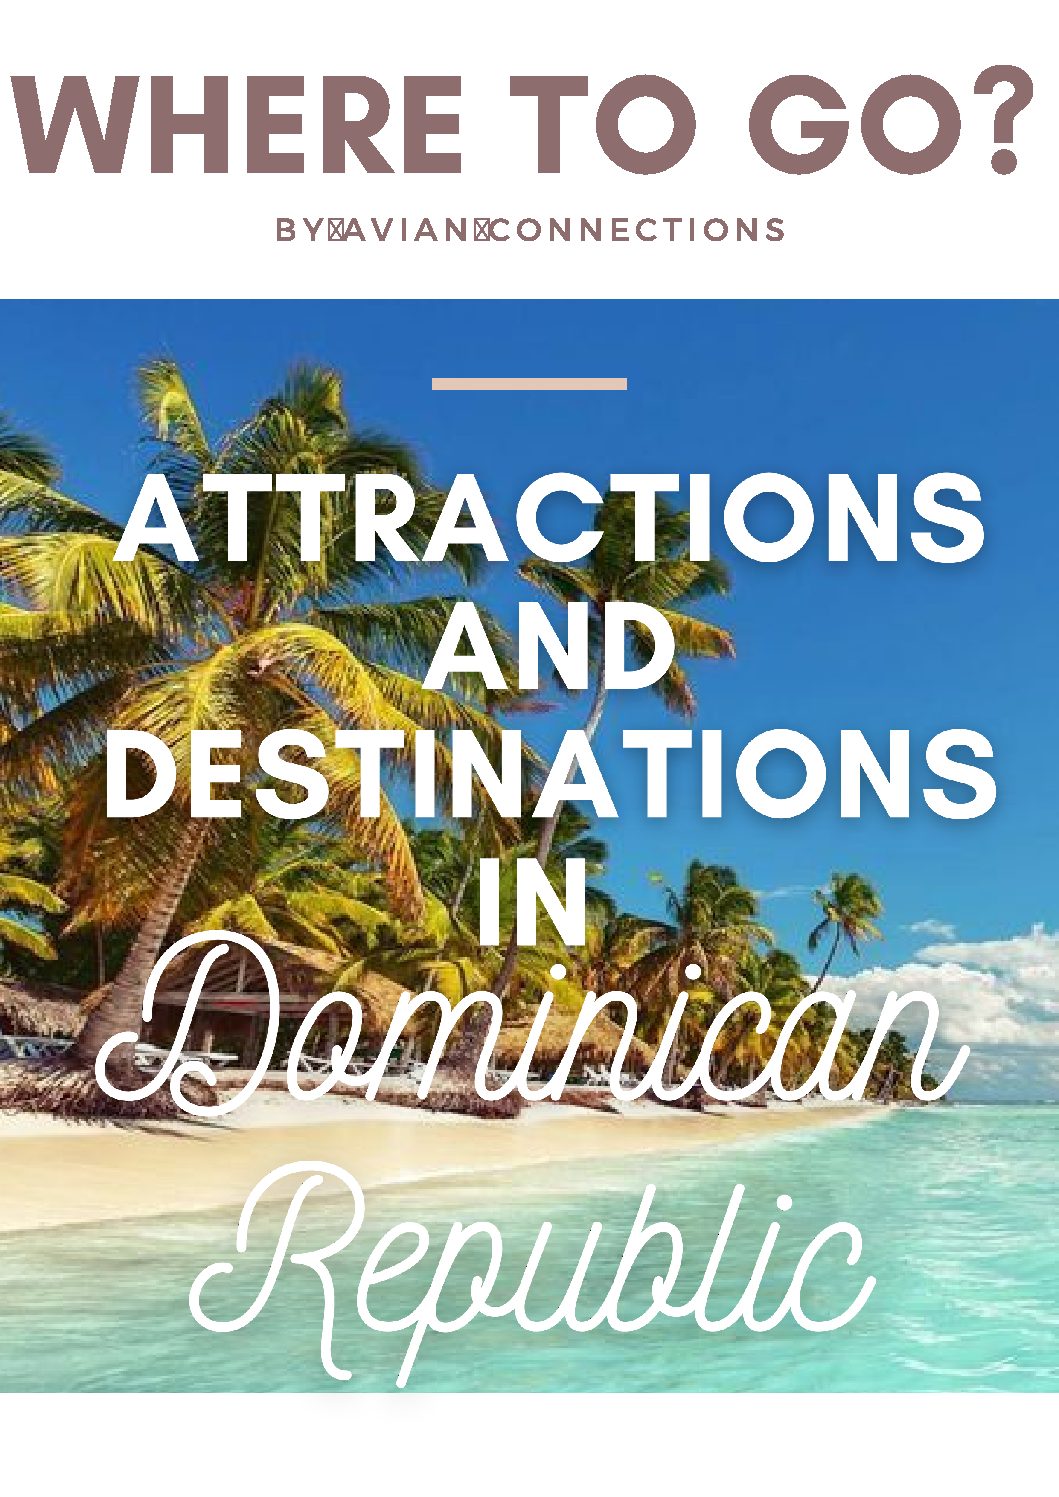 travel information for dominican republic